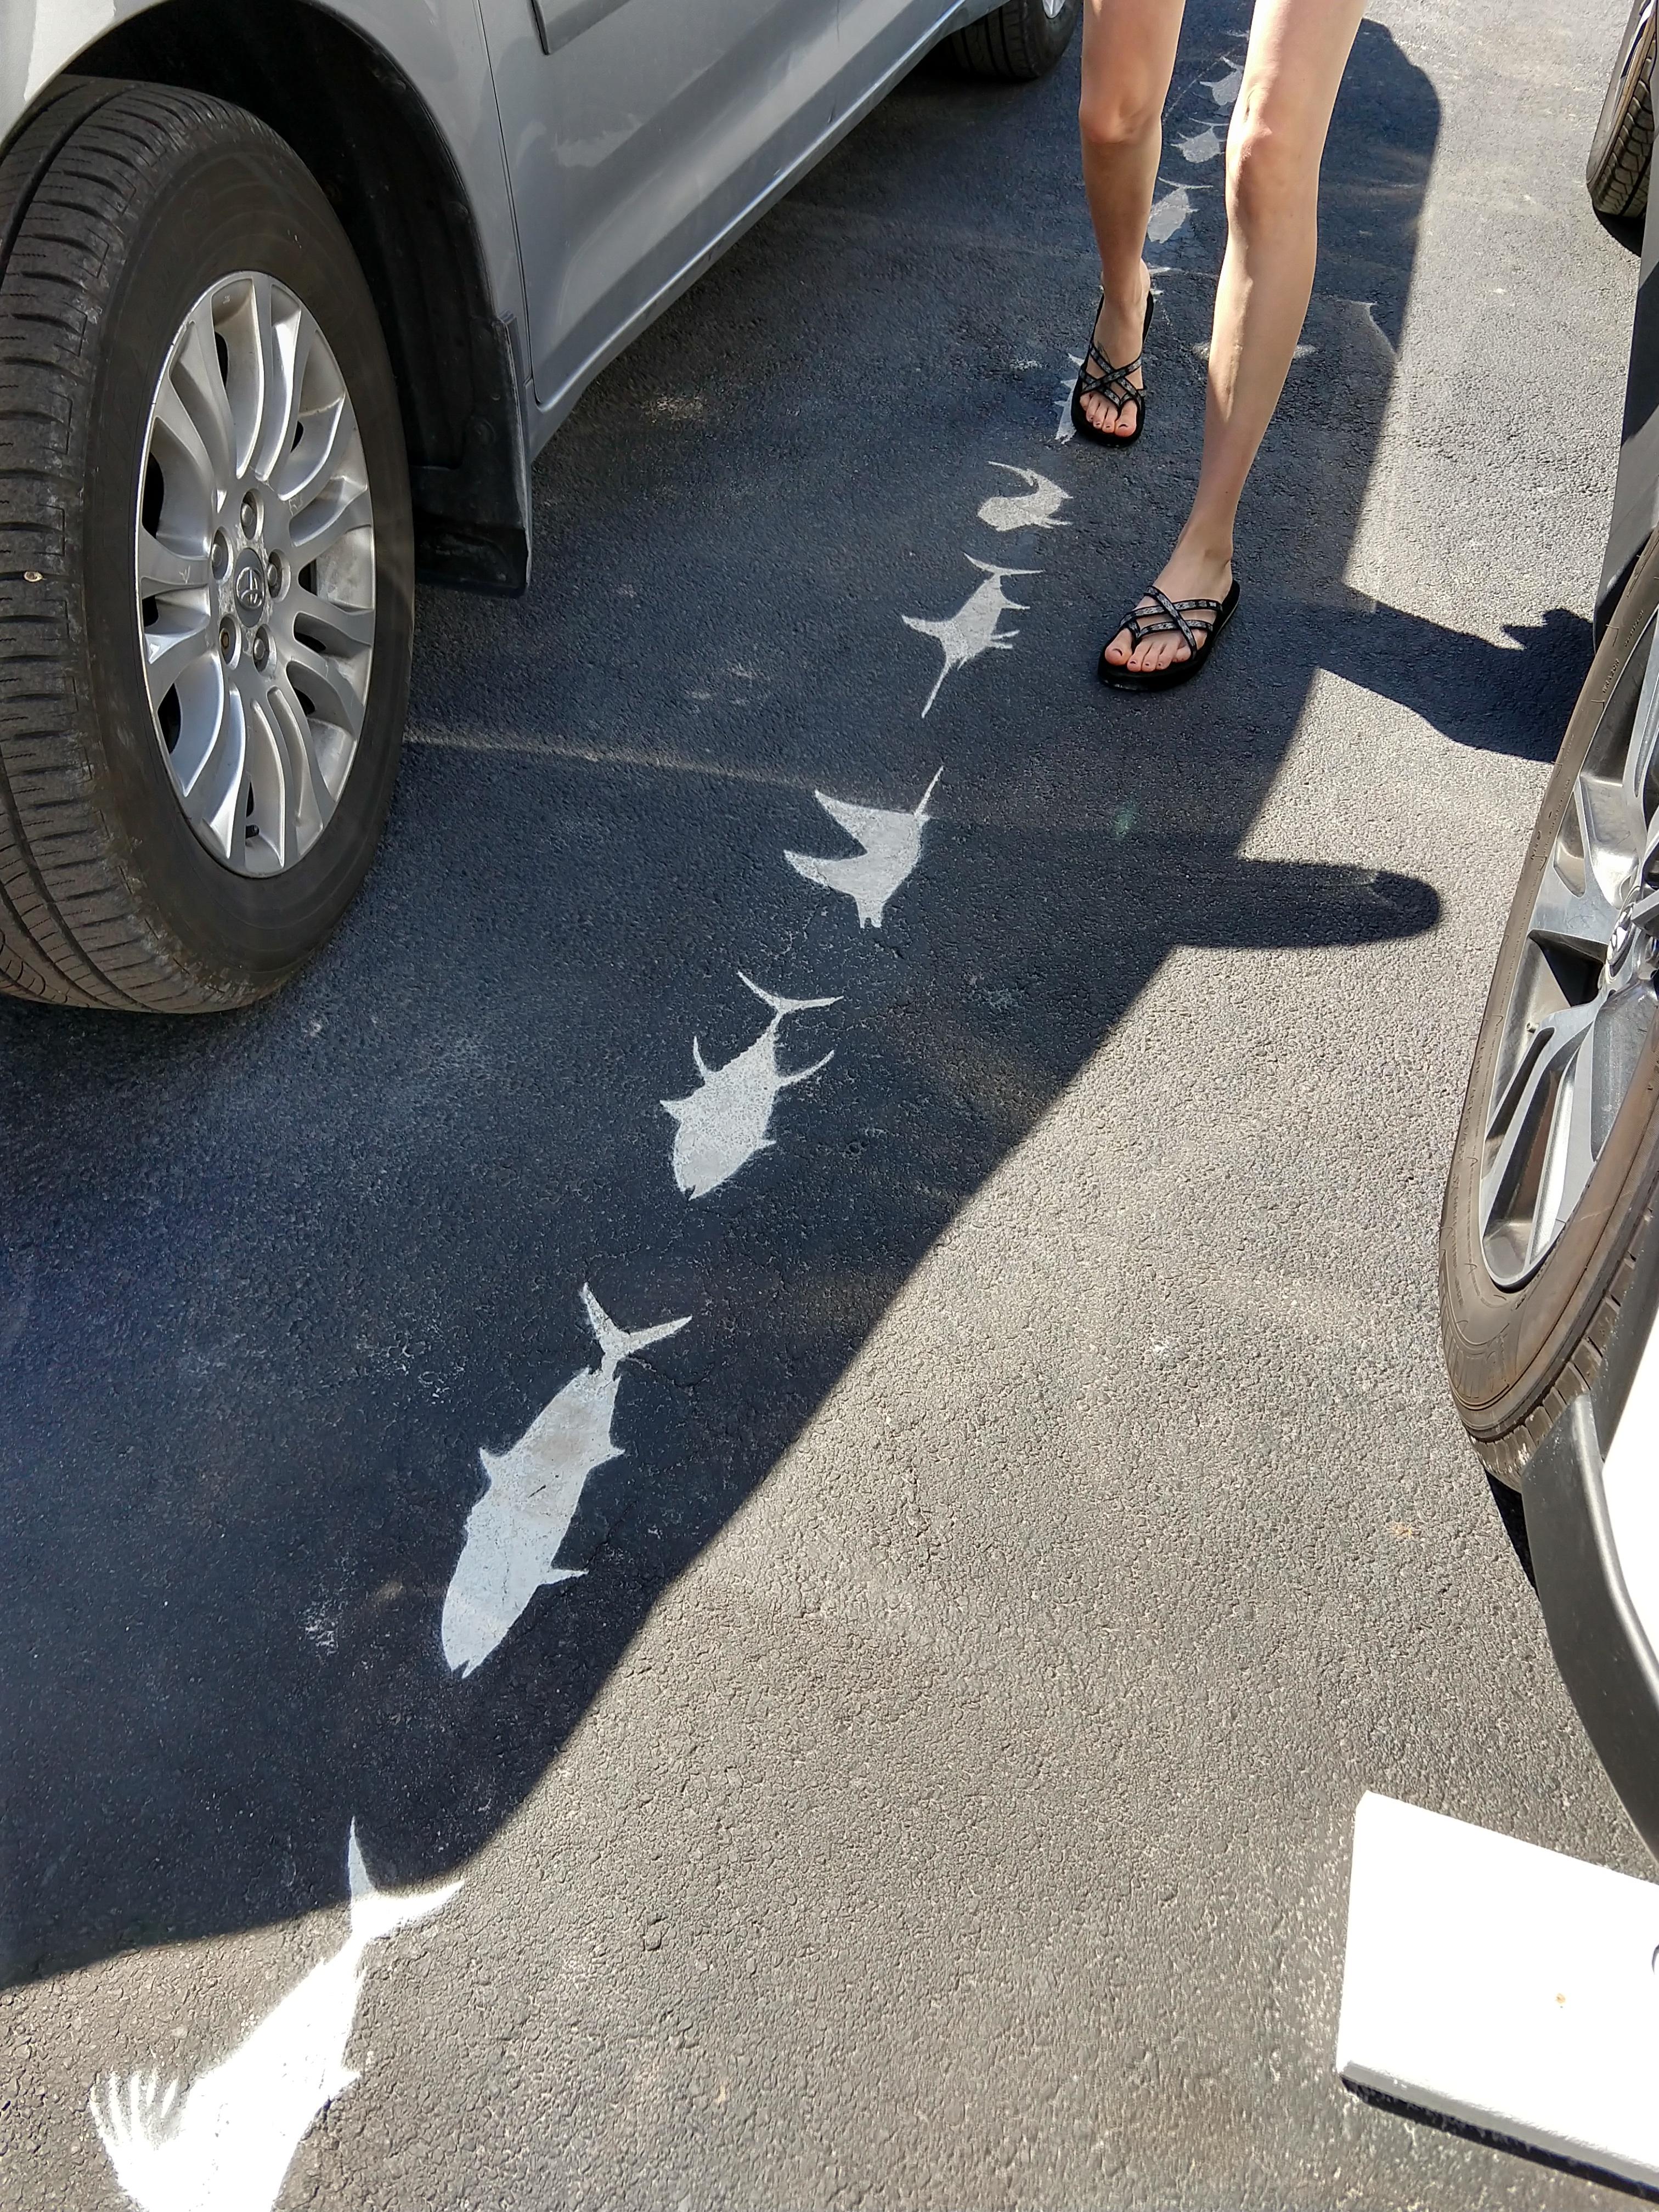 Parking lot lines in the Florida Keys are shaped like fish